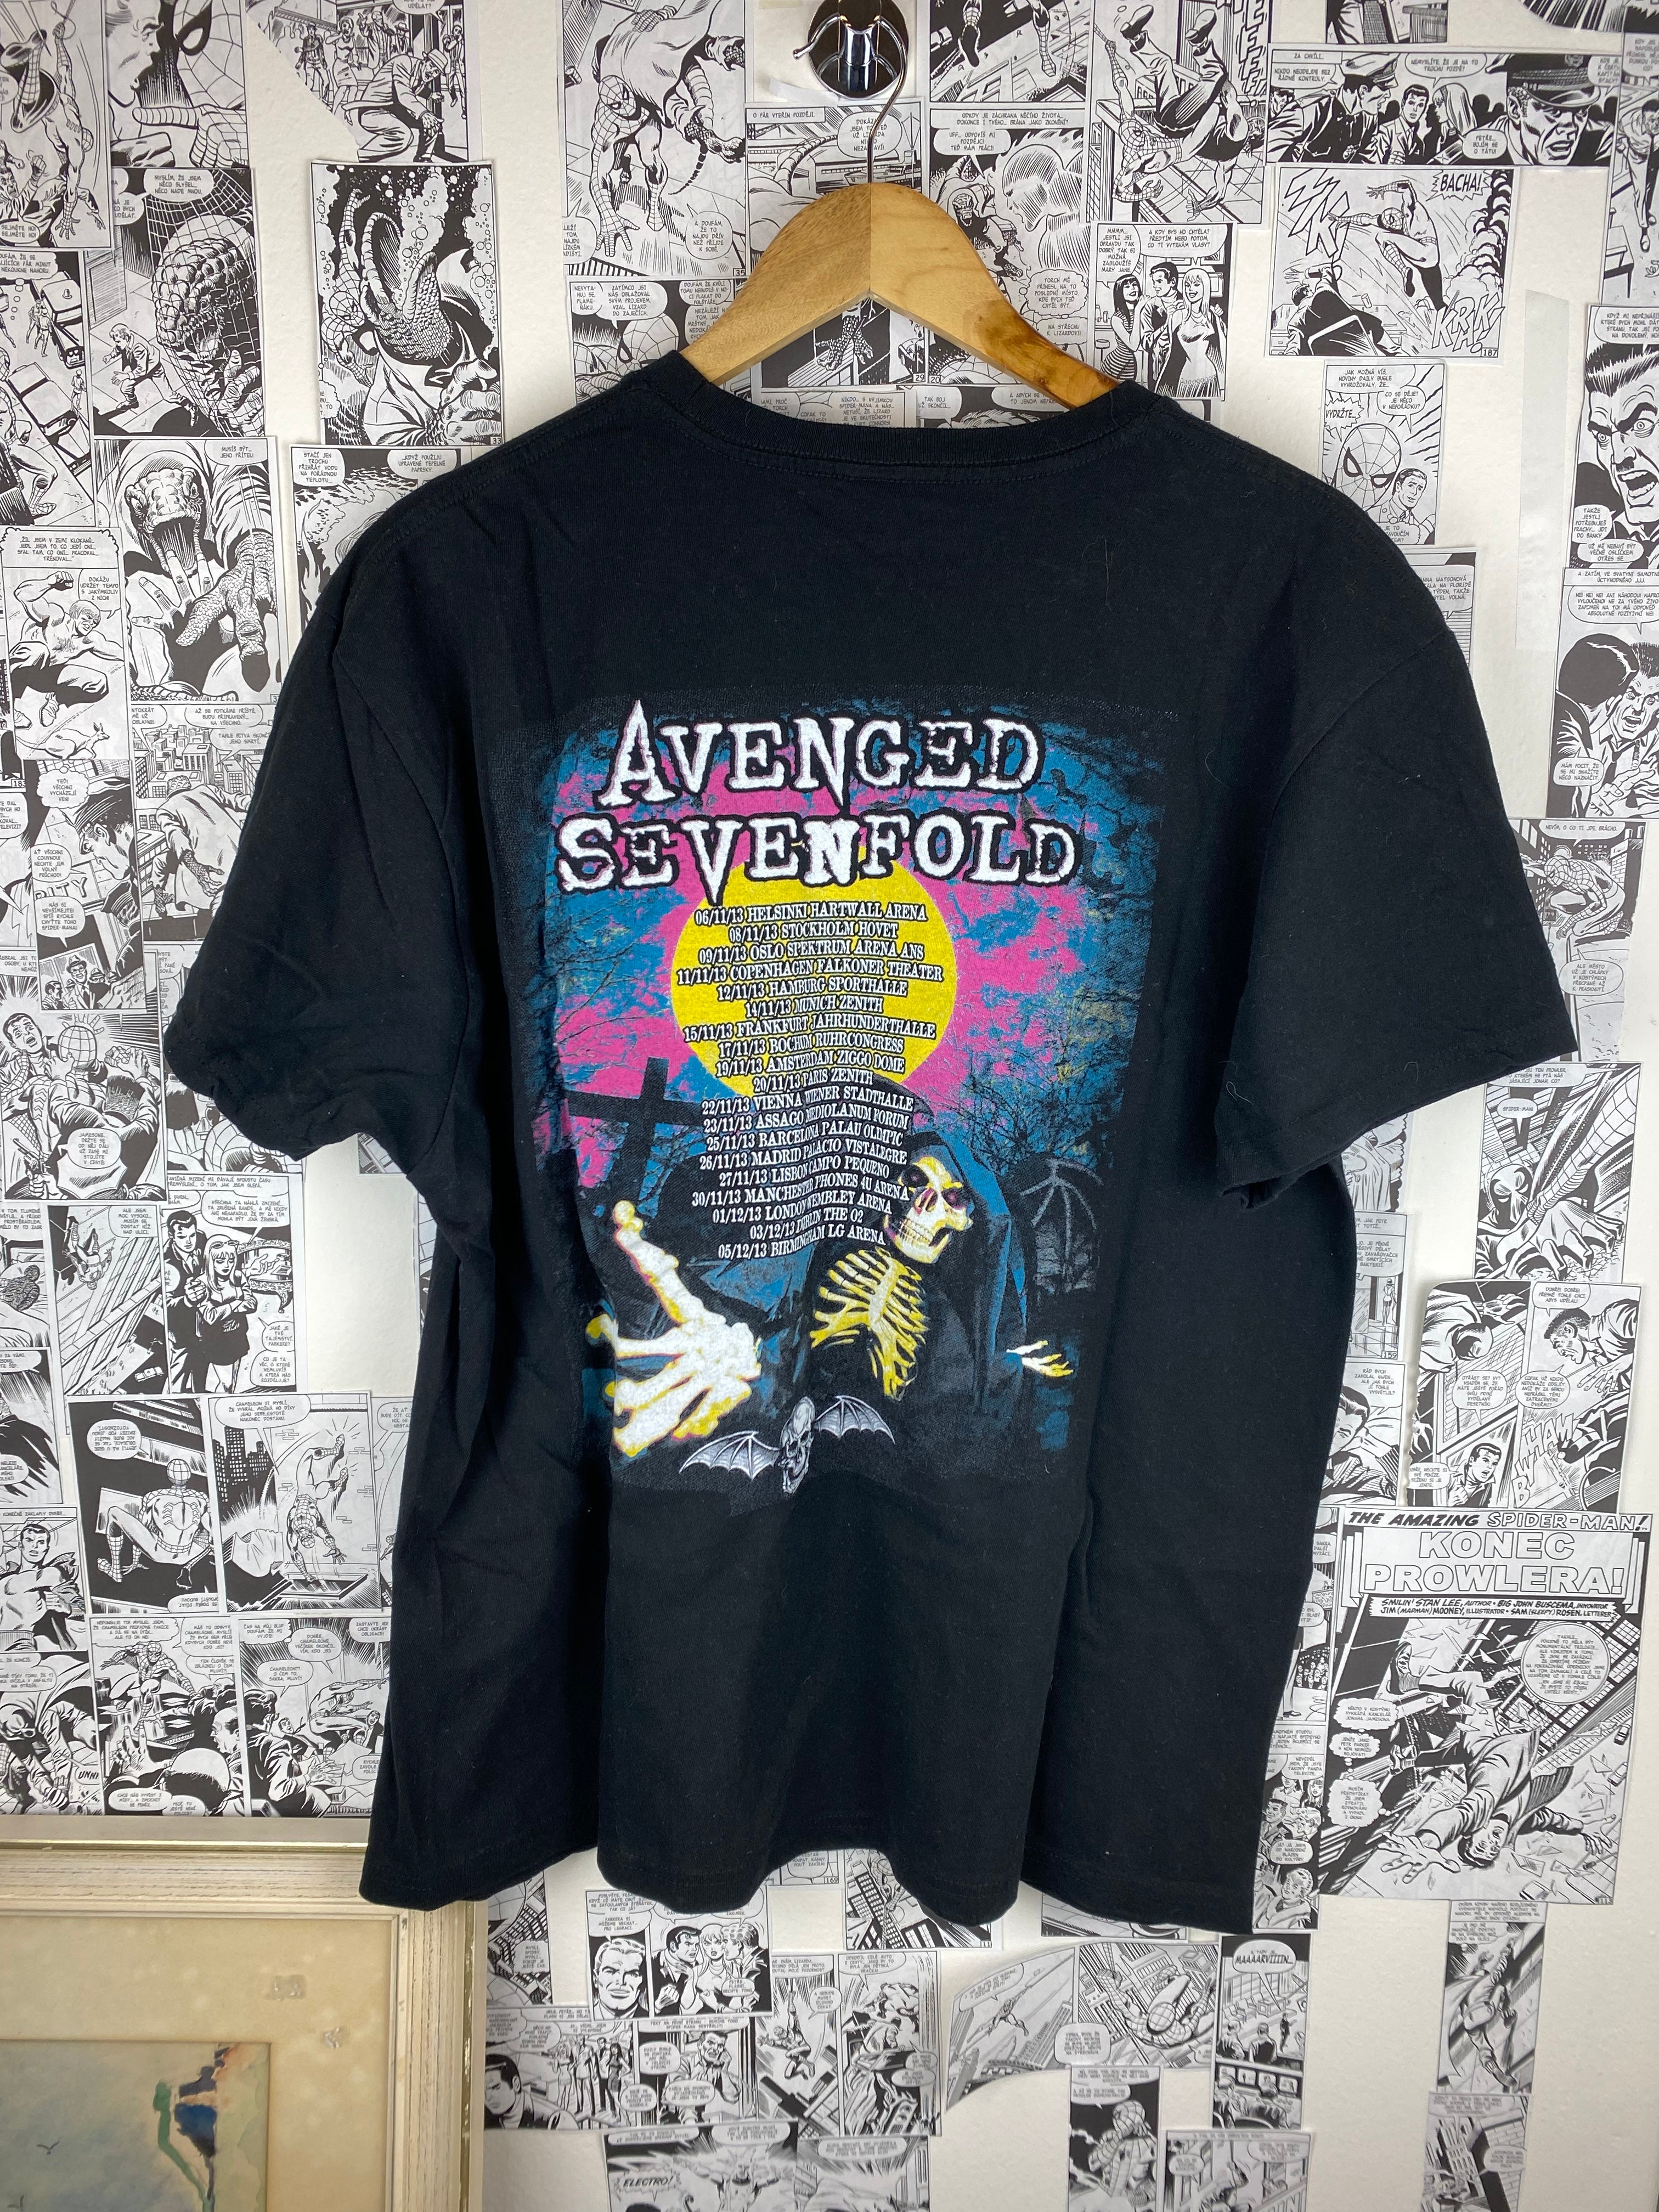 Vintage Avenged Sevenfold “Hail to the king” t-shirt - size XL